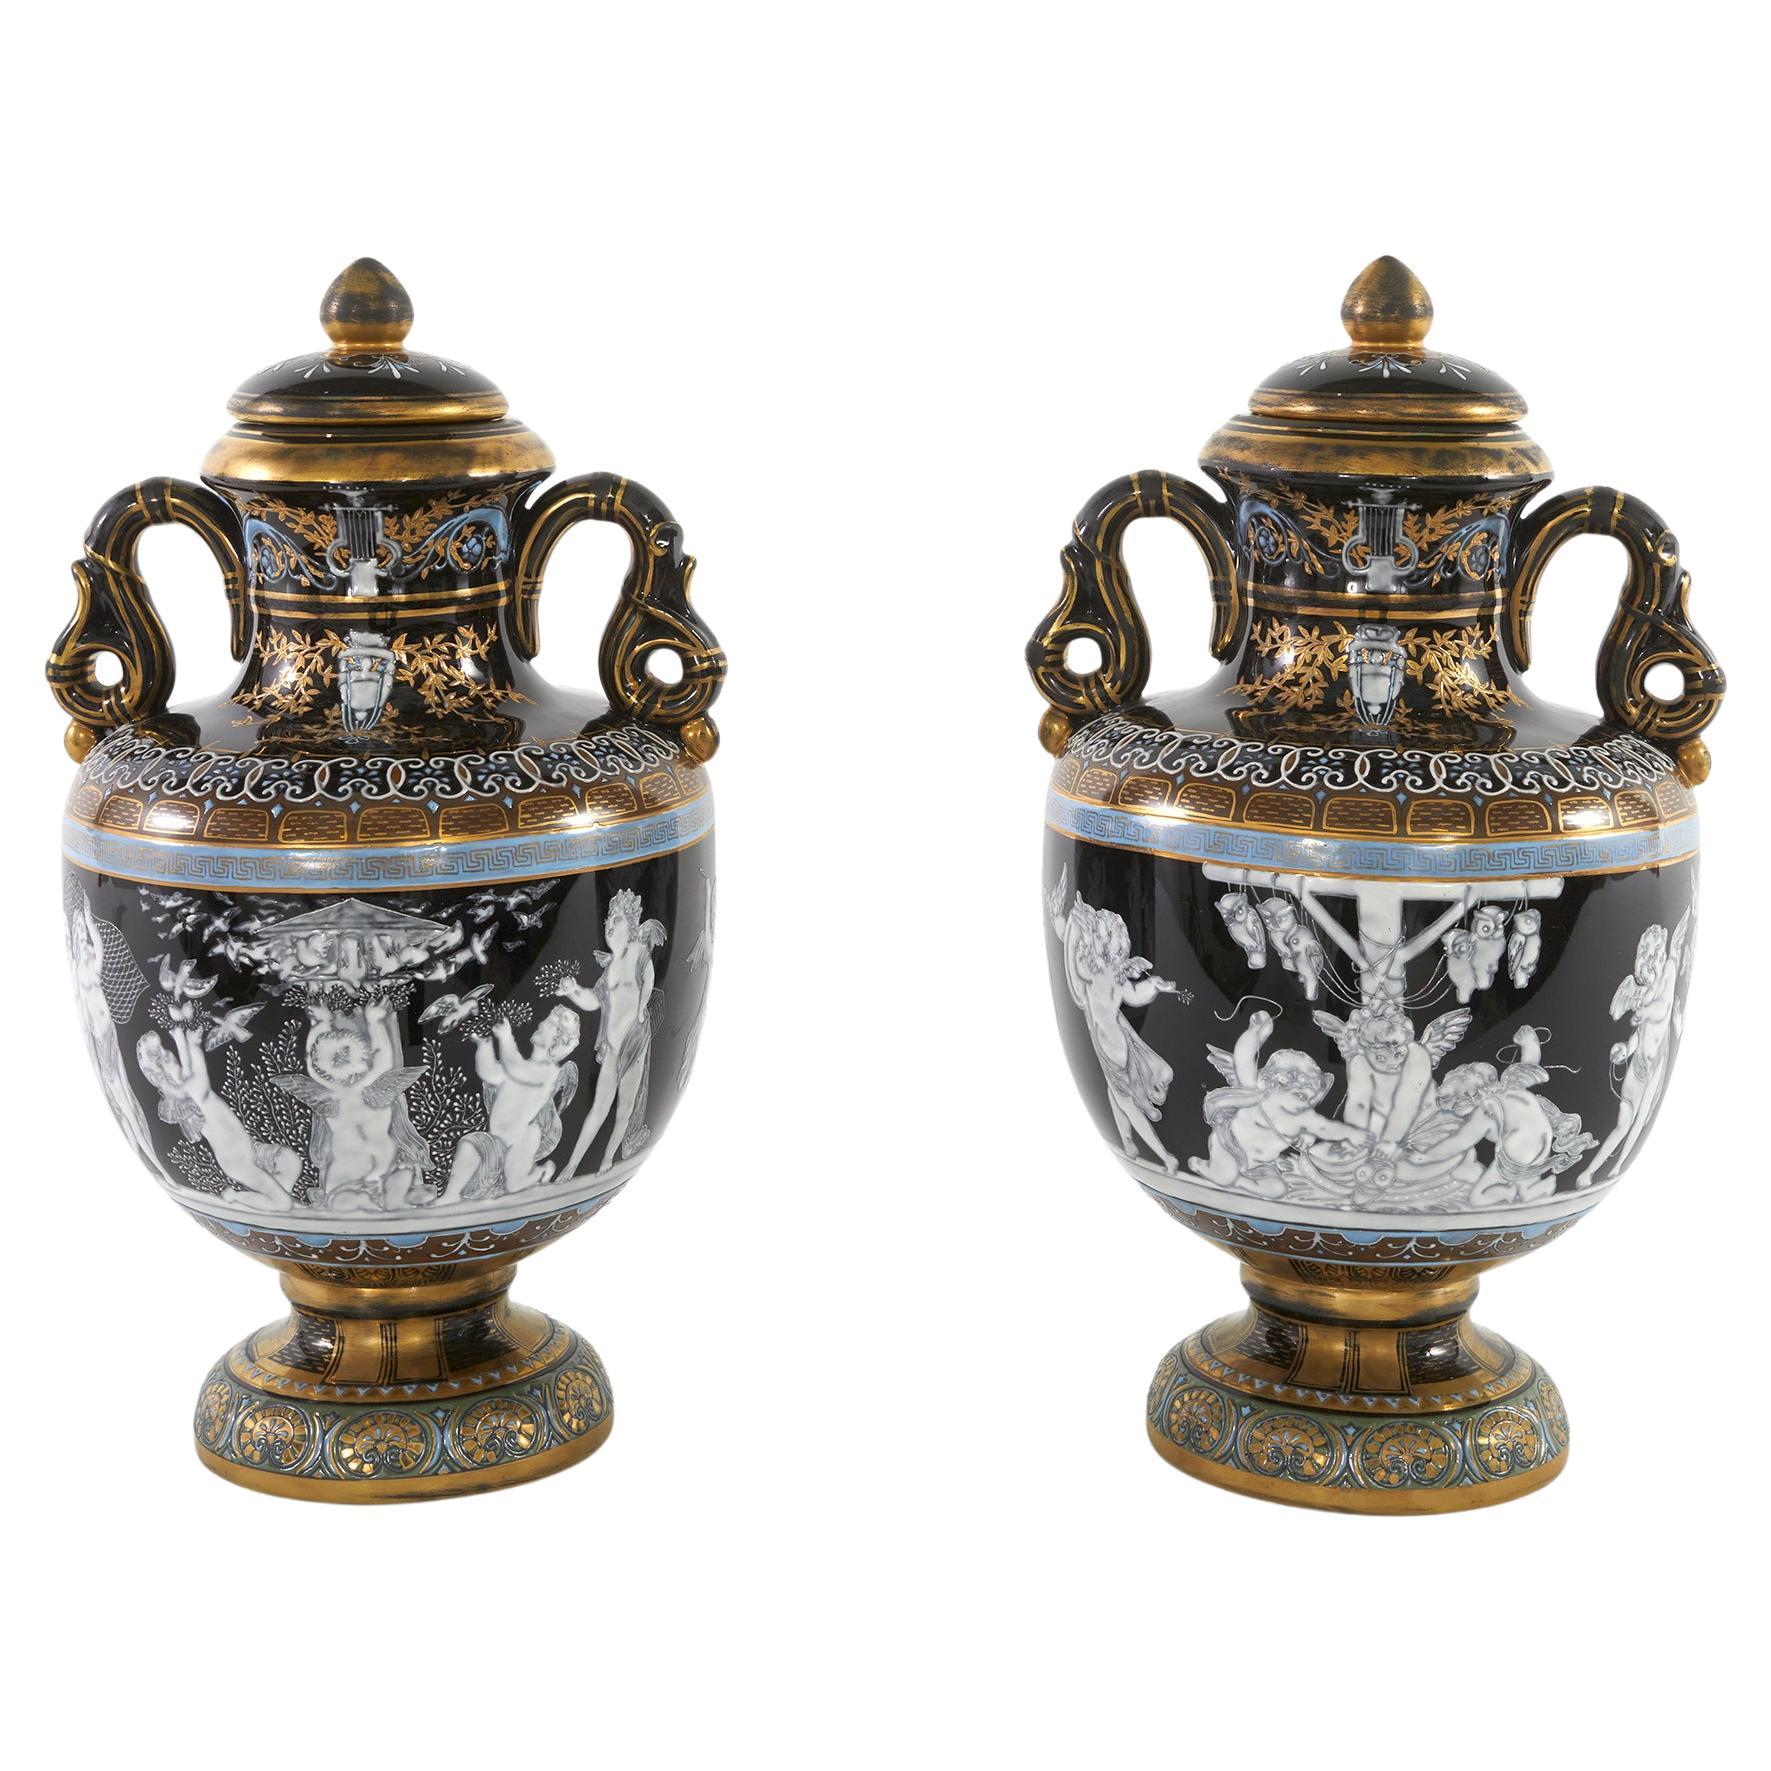 English Minton Porcelain Covered Urns For Sale